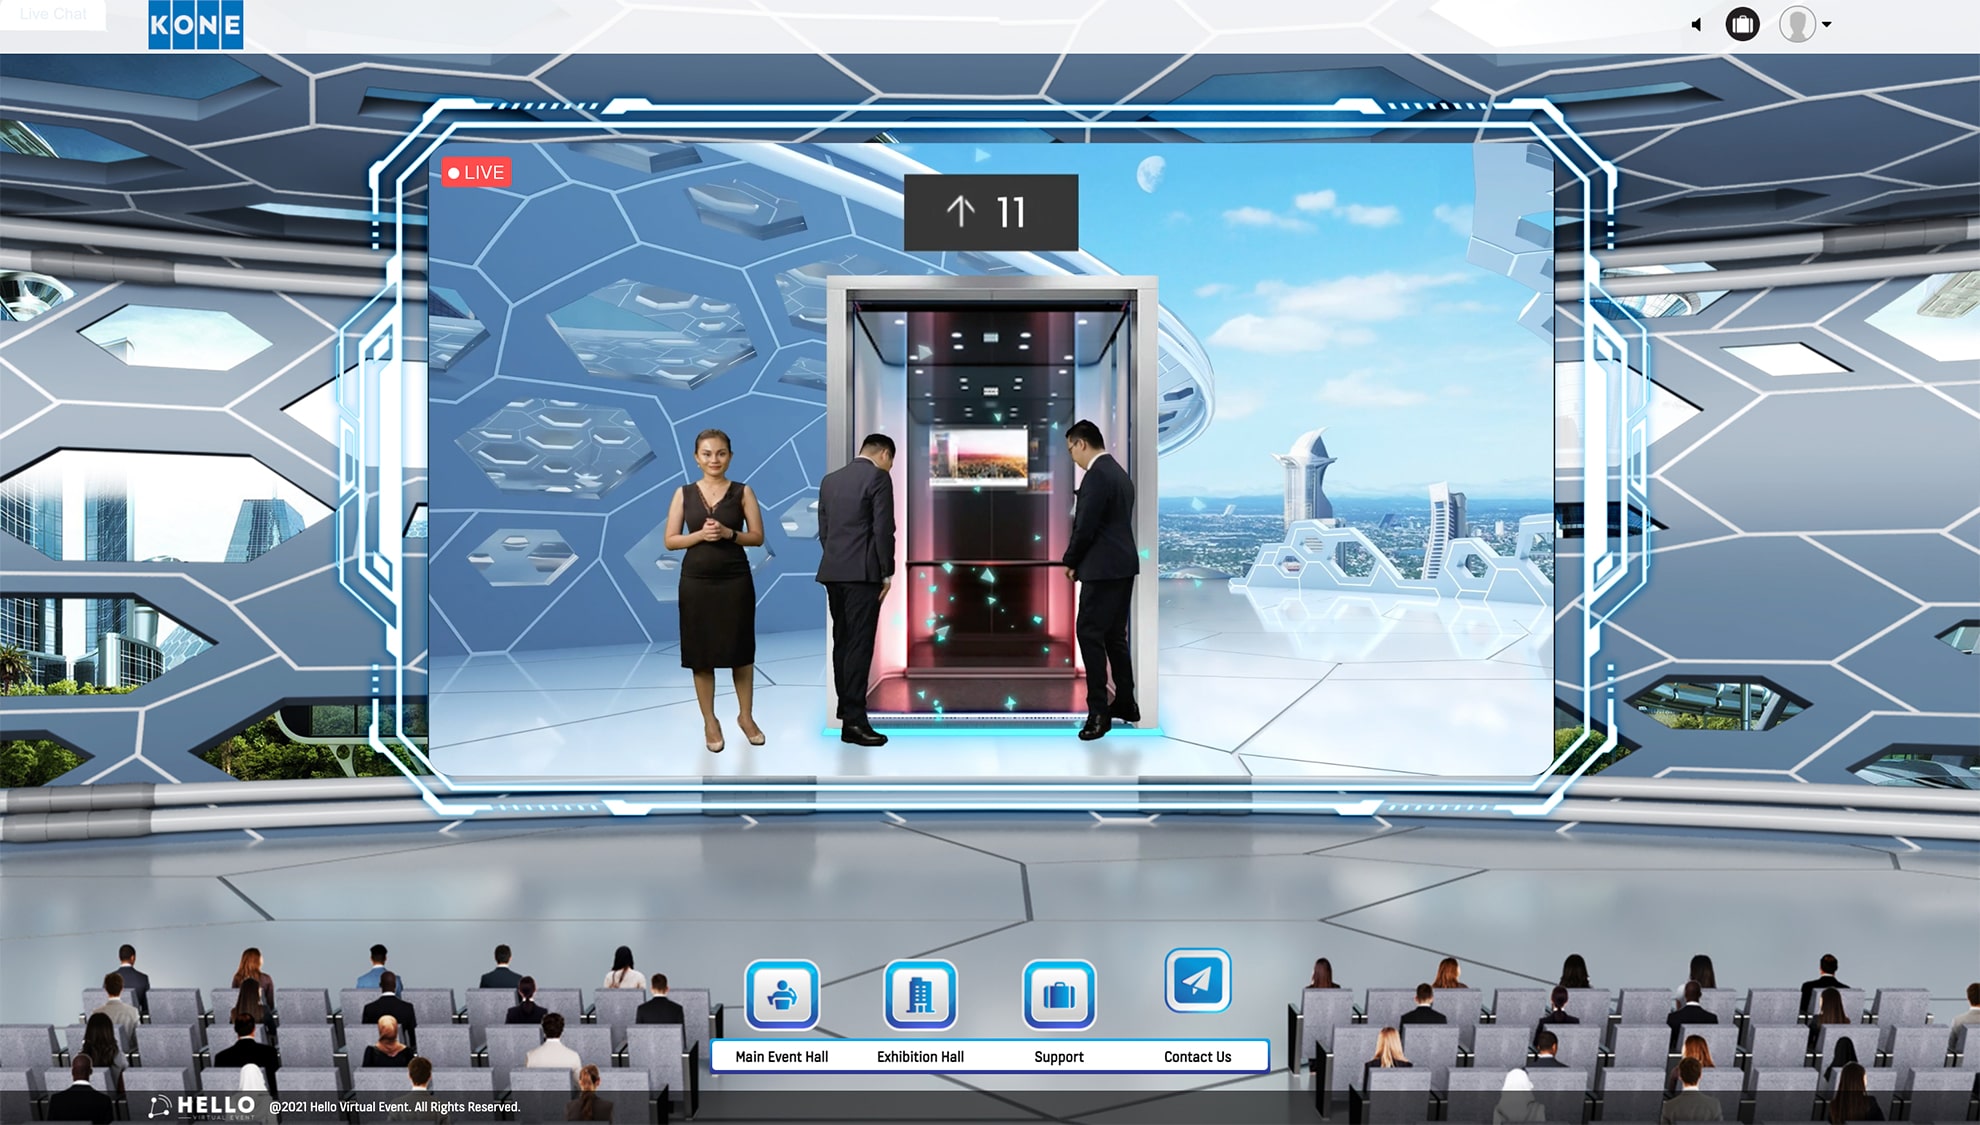 KONE's virtual product launch features a virtual lobby to connect with event attendees like the traditional trade shows.